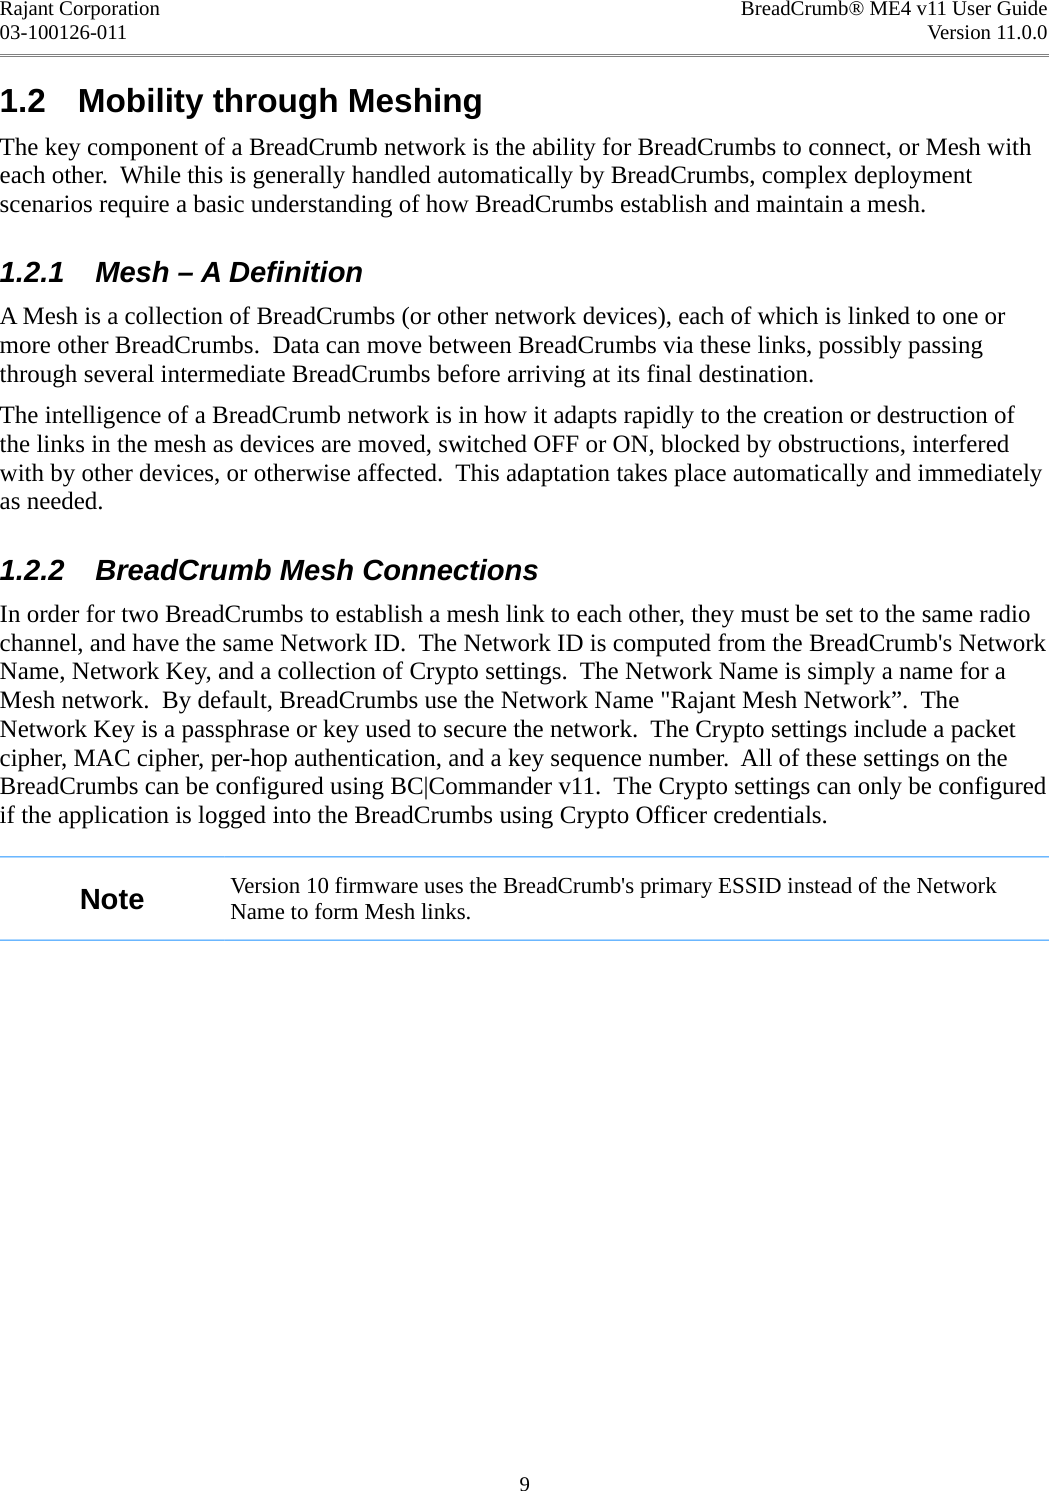 Rajant Corporation BreadCrumb® ME4 v11 User Guide03-100126-011 Version 11.0.01.2  Mobility through MeshingThe key component of a BreadCrumb network is the ability for BreadCrumbs to connect, or Mesh with each other.  While this is generally handled automatically by BreadCrumbs, complex deployment scenarios require a basic understanding of how BreadCrumbs establish and maintain a mesh.1.2.1  Mesh – A DefinitionA Mesh is a collection of BreadCrumbs (or other network devices), each of which is linked to one or more other BreadCrumbs.  Data can move between BreadCrumbs via these links, possibly passing through several intermediate BreadCrumbs before arriving at its final destination.The intelligence of a BreadCrumb network is in how it adapts rapidly to the creation or destruction of the links in the mesh as devices are moved, switched OFF or ON, blocked by obstructions, interfered with by other devices, or otherwise affected.  This adaptation takes place automatically and immediately as needed.1.2.2  BreadCrumb Mesh ConnectionsIn order for two BreadCrumbs to establish a mesh link to each other, they must be set to the same radio channel, and have the same Network ID.  The Network ID is computed from the BreadCrumb&apos;s Network Name, Network Key, and a collection of Crypto settings.  The Network Name is simply a name for a Mesh network.  By default, BreadCrumbs use the Network Name &quot;Rajant Mesh Network”.  The Network Key is a passphrase or key used to secure the network.  The Crypto settings include a packet cipher, MAC cipher, per-hop authentication, and a key sequence number.  All of these settings on the BreadCrumbs can be configured using BC|Commander v11.  The Crypto settings can only be configured if the application is logged into the BreadCrumbs using Crypto Officer credentials.Note Version 10 firmware uses the BreadCrumb&apos;s primary ESSID instead of the Network Name to form Mesh links.9